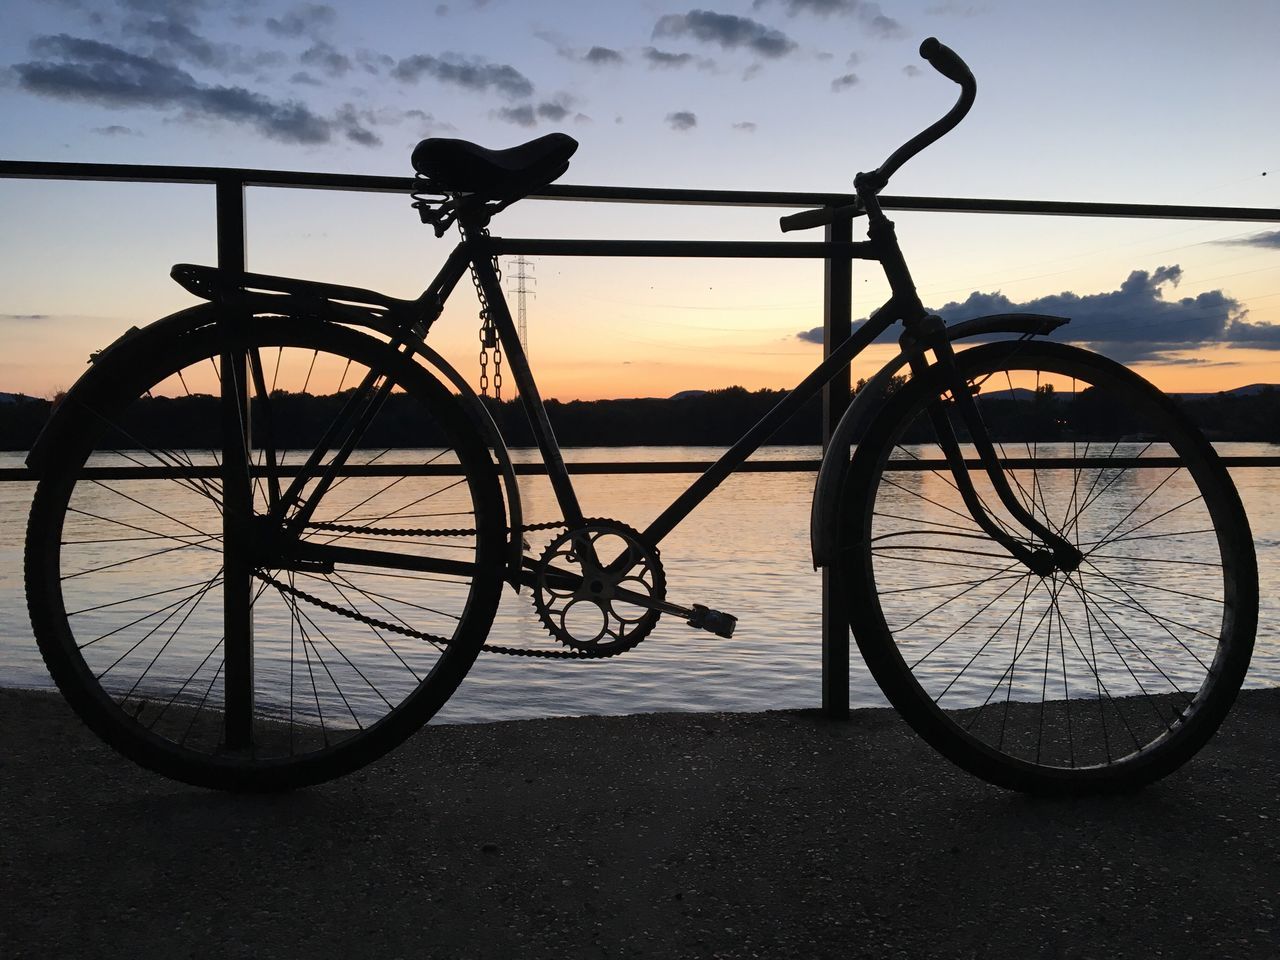 transportation, bicycle, sky, mode of transportation, sunset, road bicycle, water, nature, silhouette, vehicle, cloud, wheel, land, land vehicle, sports equipment, dusk, no people, travel, city, sea, cycling, beach, activity, bicycle wheel, scenics - nature, environment, beauty in nature, outdoors, landscape, dramatic sky, mountain bike, sunlight, tranquility, pedal, tire, back lit, sports